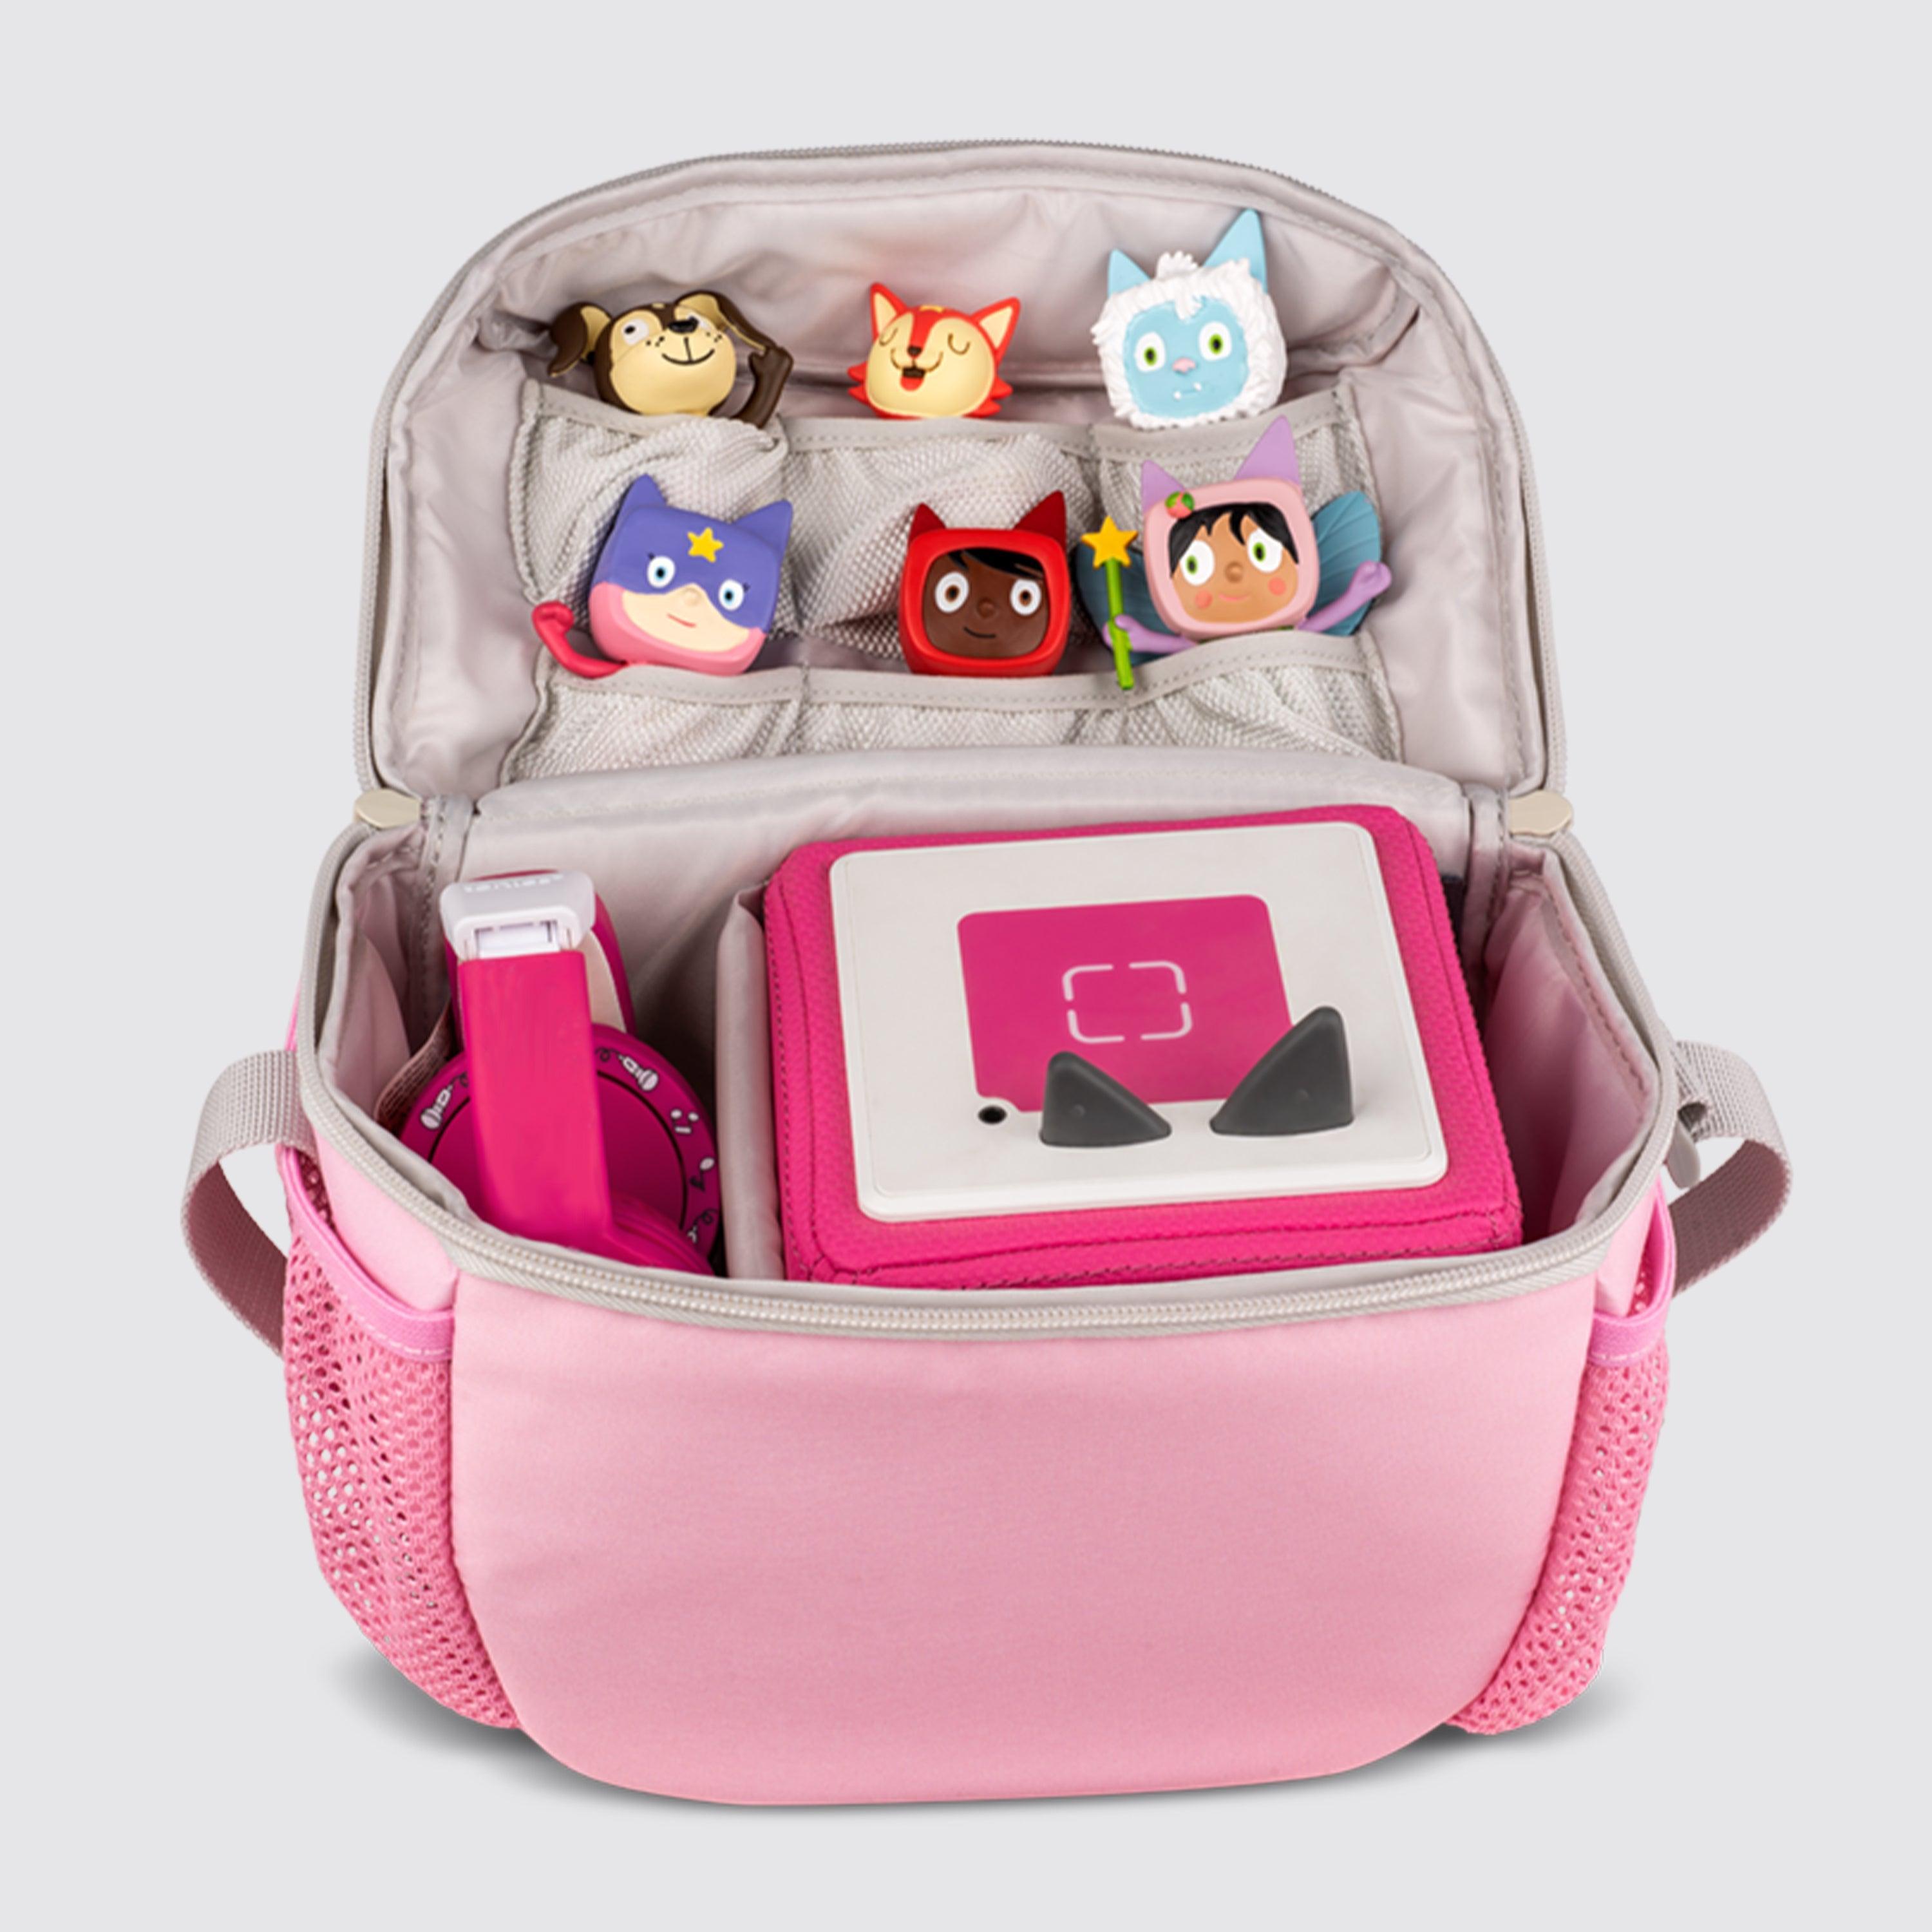 Tonies Character Travel Bag, Fairy - Why and Whale